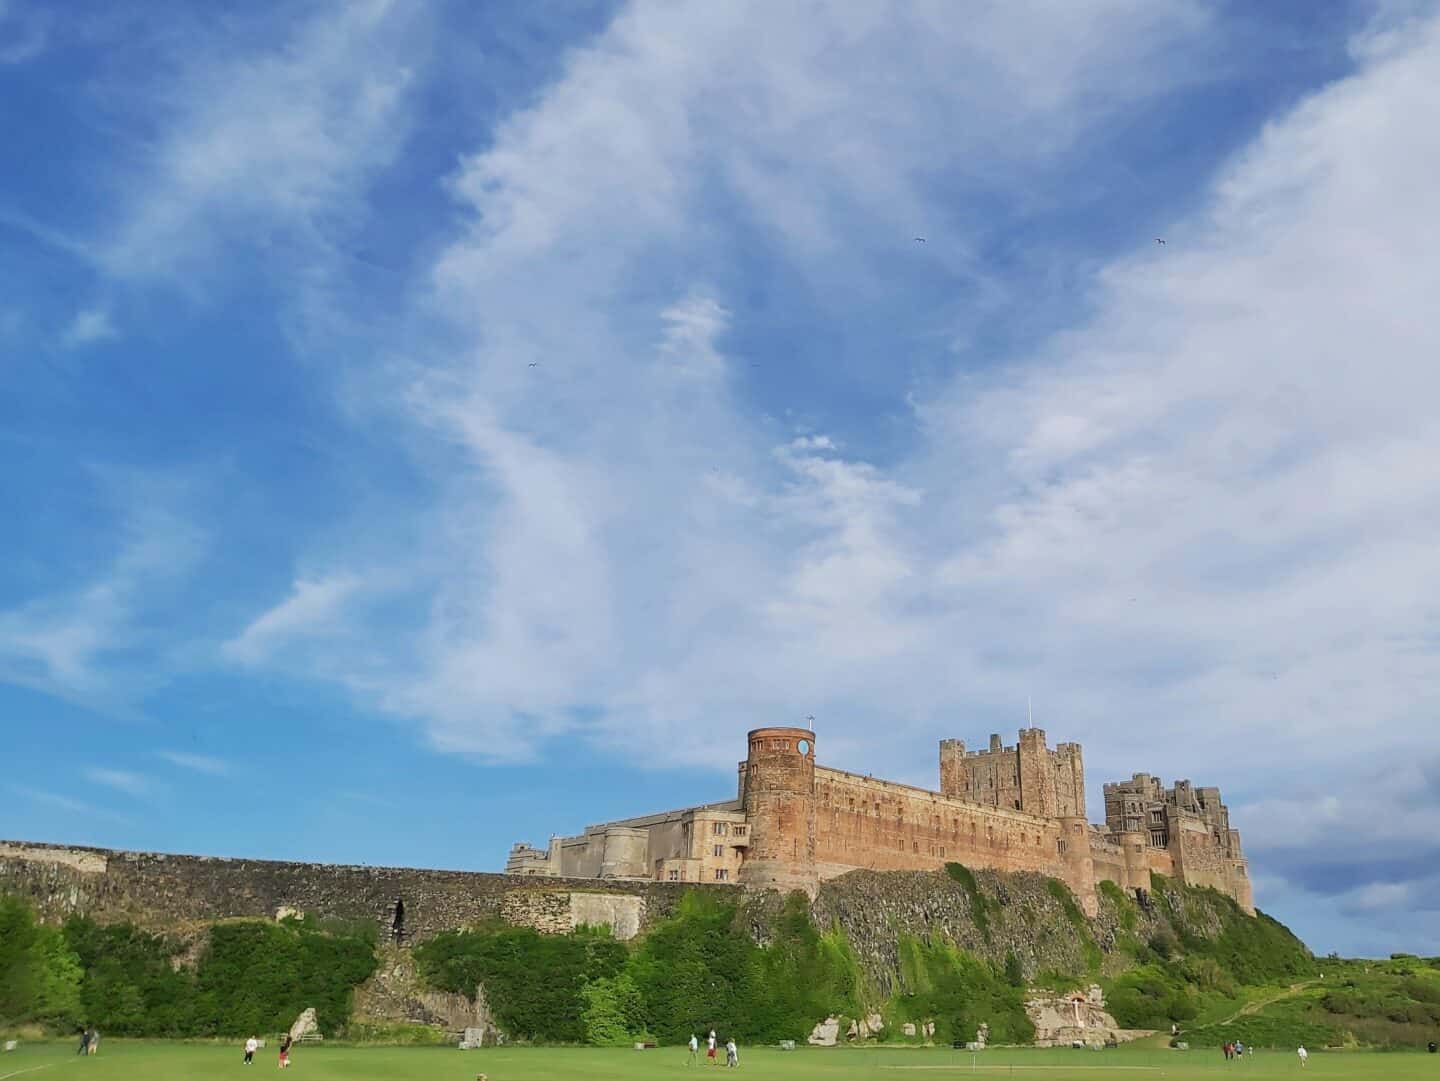 Family road trip itinerary: From the West Midlands to the Scottish Highlands. Spending a couple of days in Bamburgh. Photo of Bamburgh Castle with sports pitch in foreground and blue sky with light white clouds.  